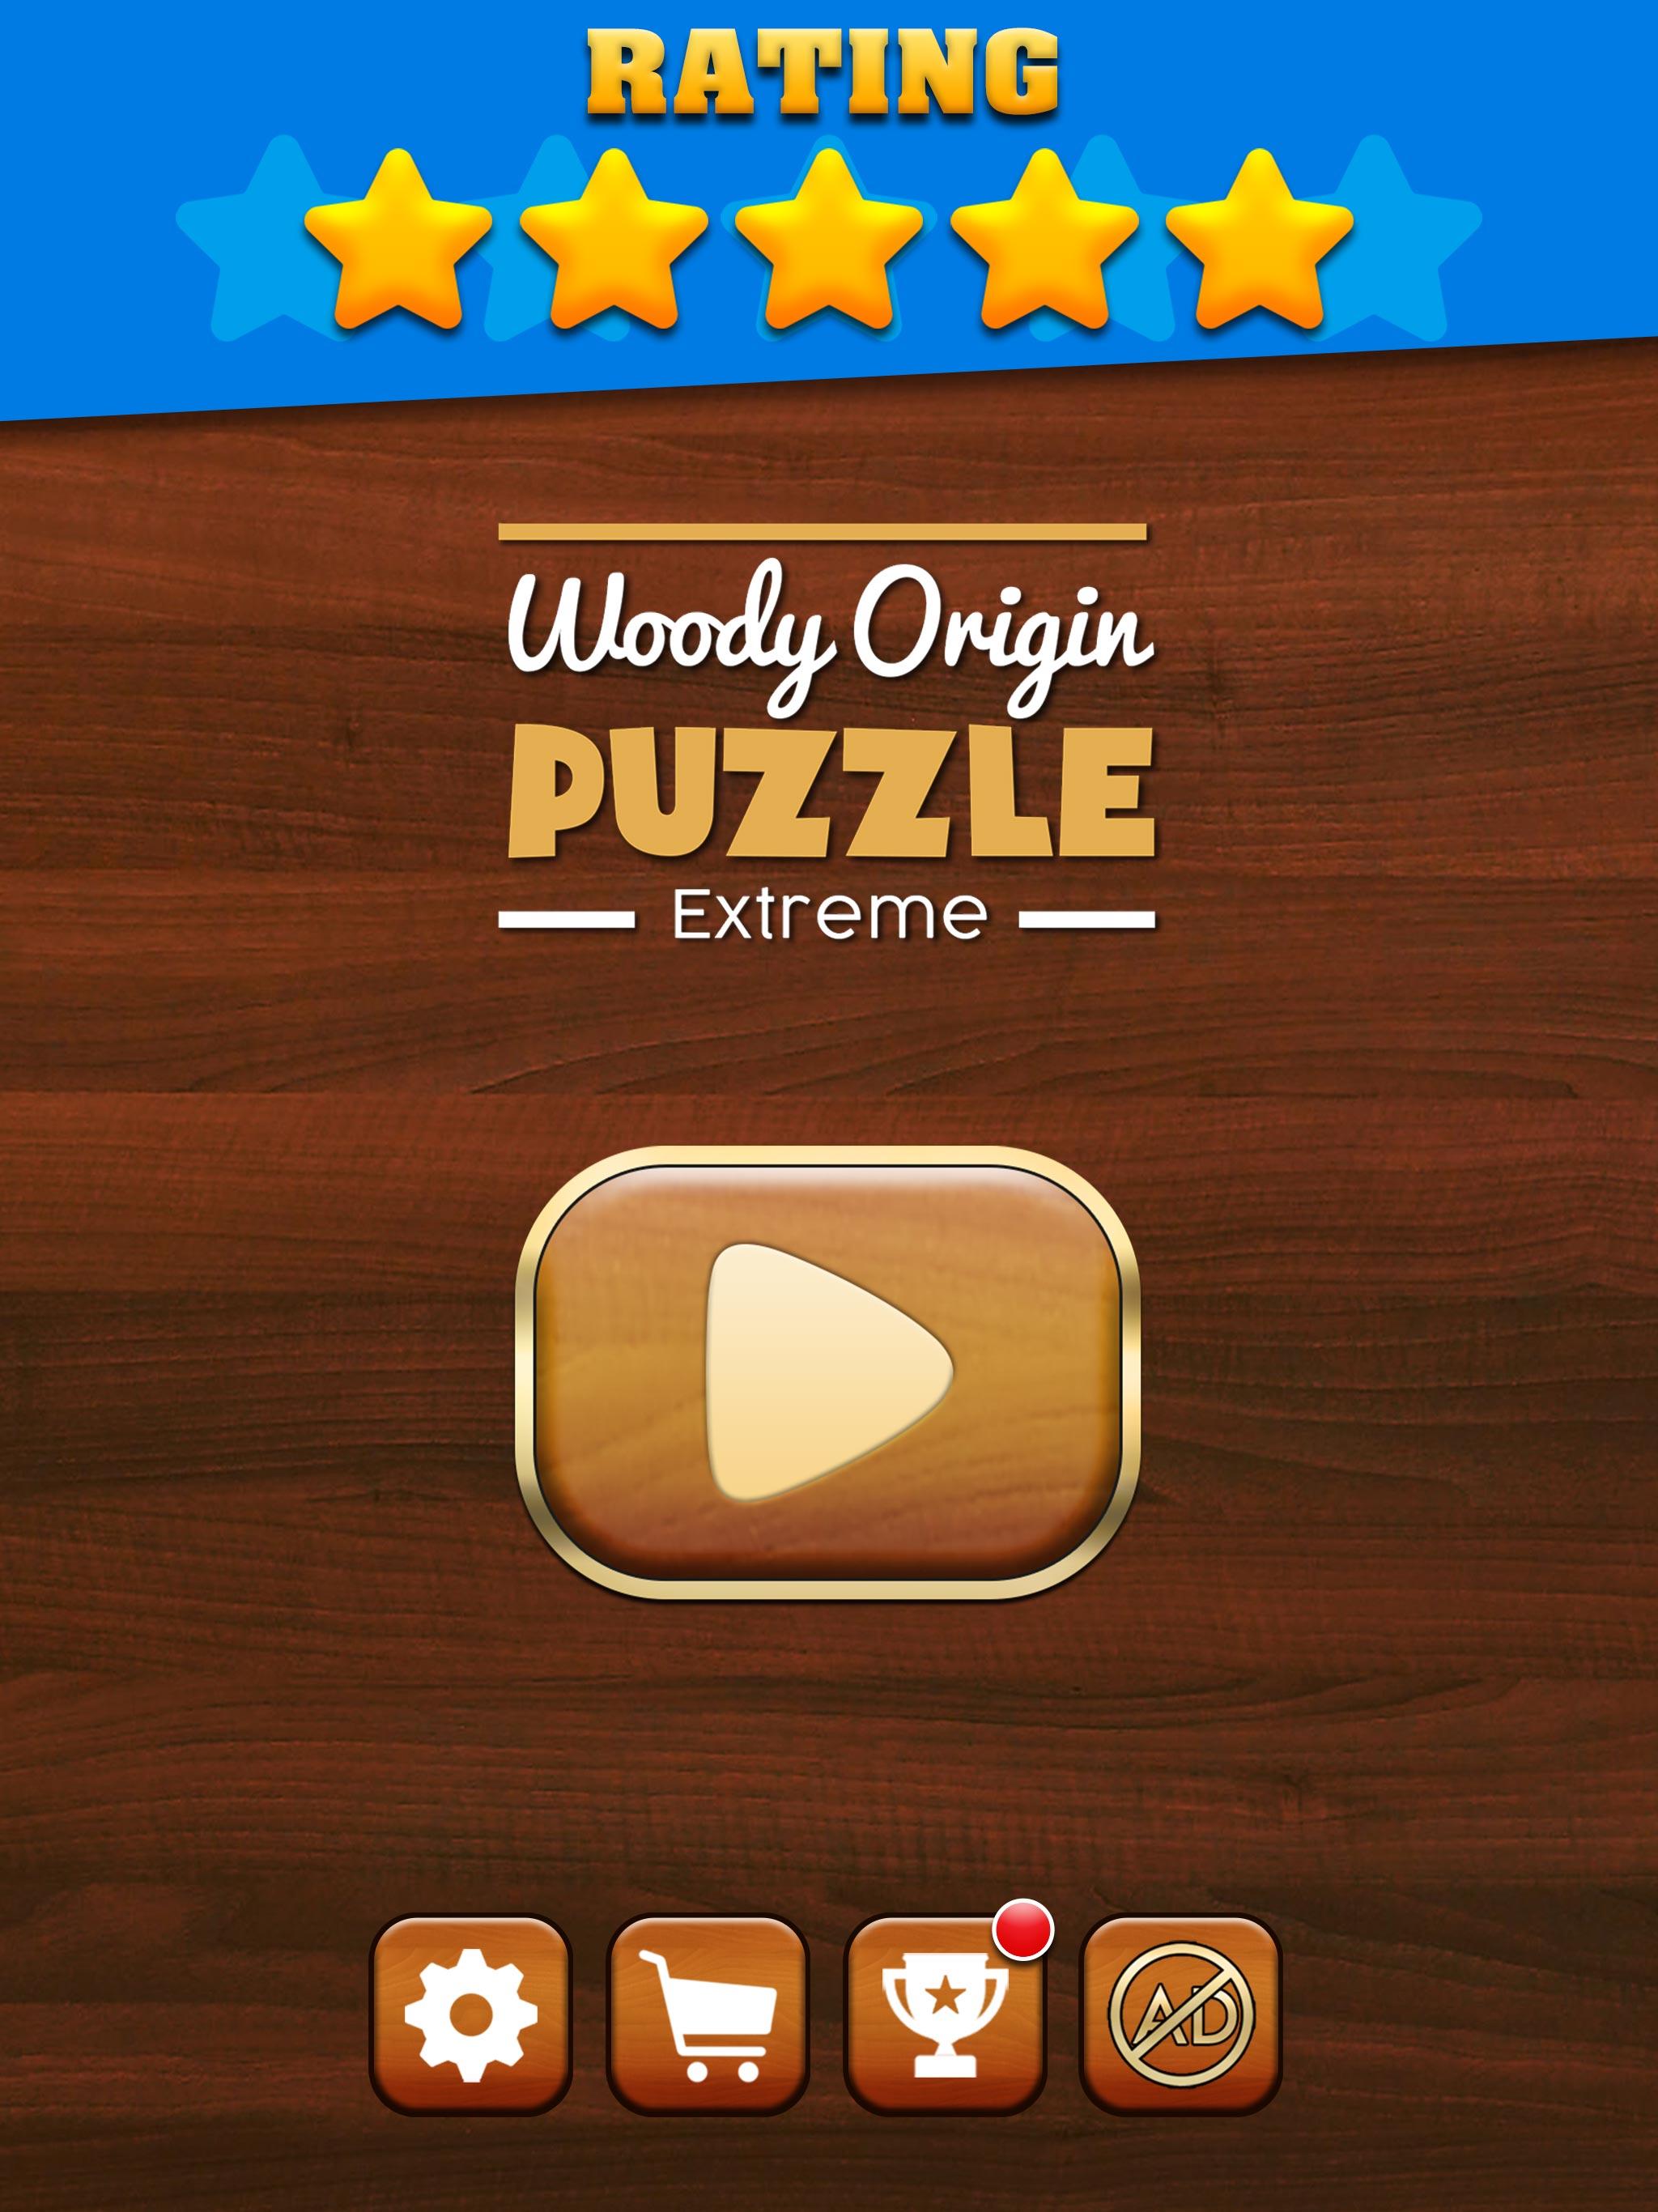 Woody Extreme: Wood Block Puzzle Games for free 2.4.0 Screenshot 21